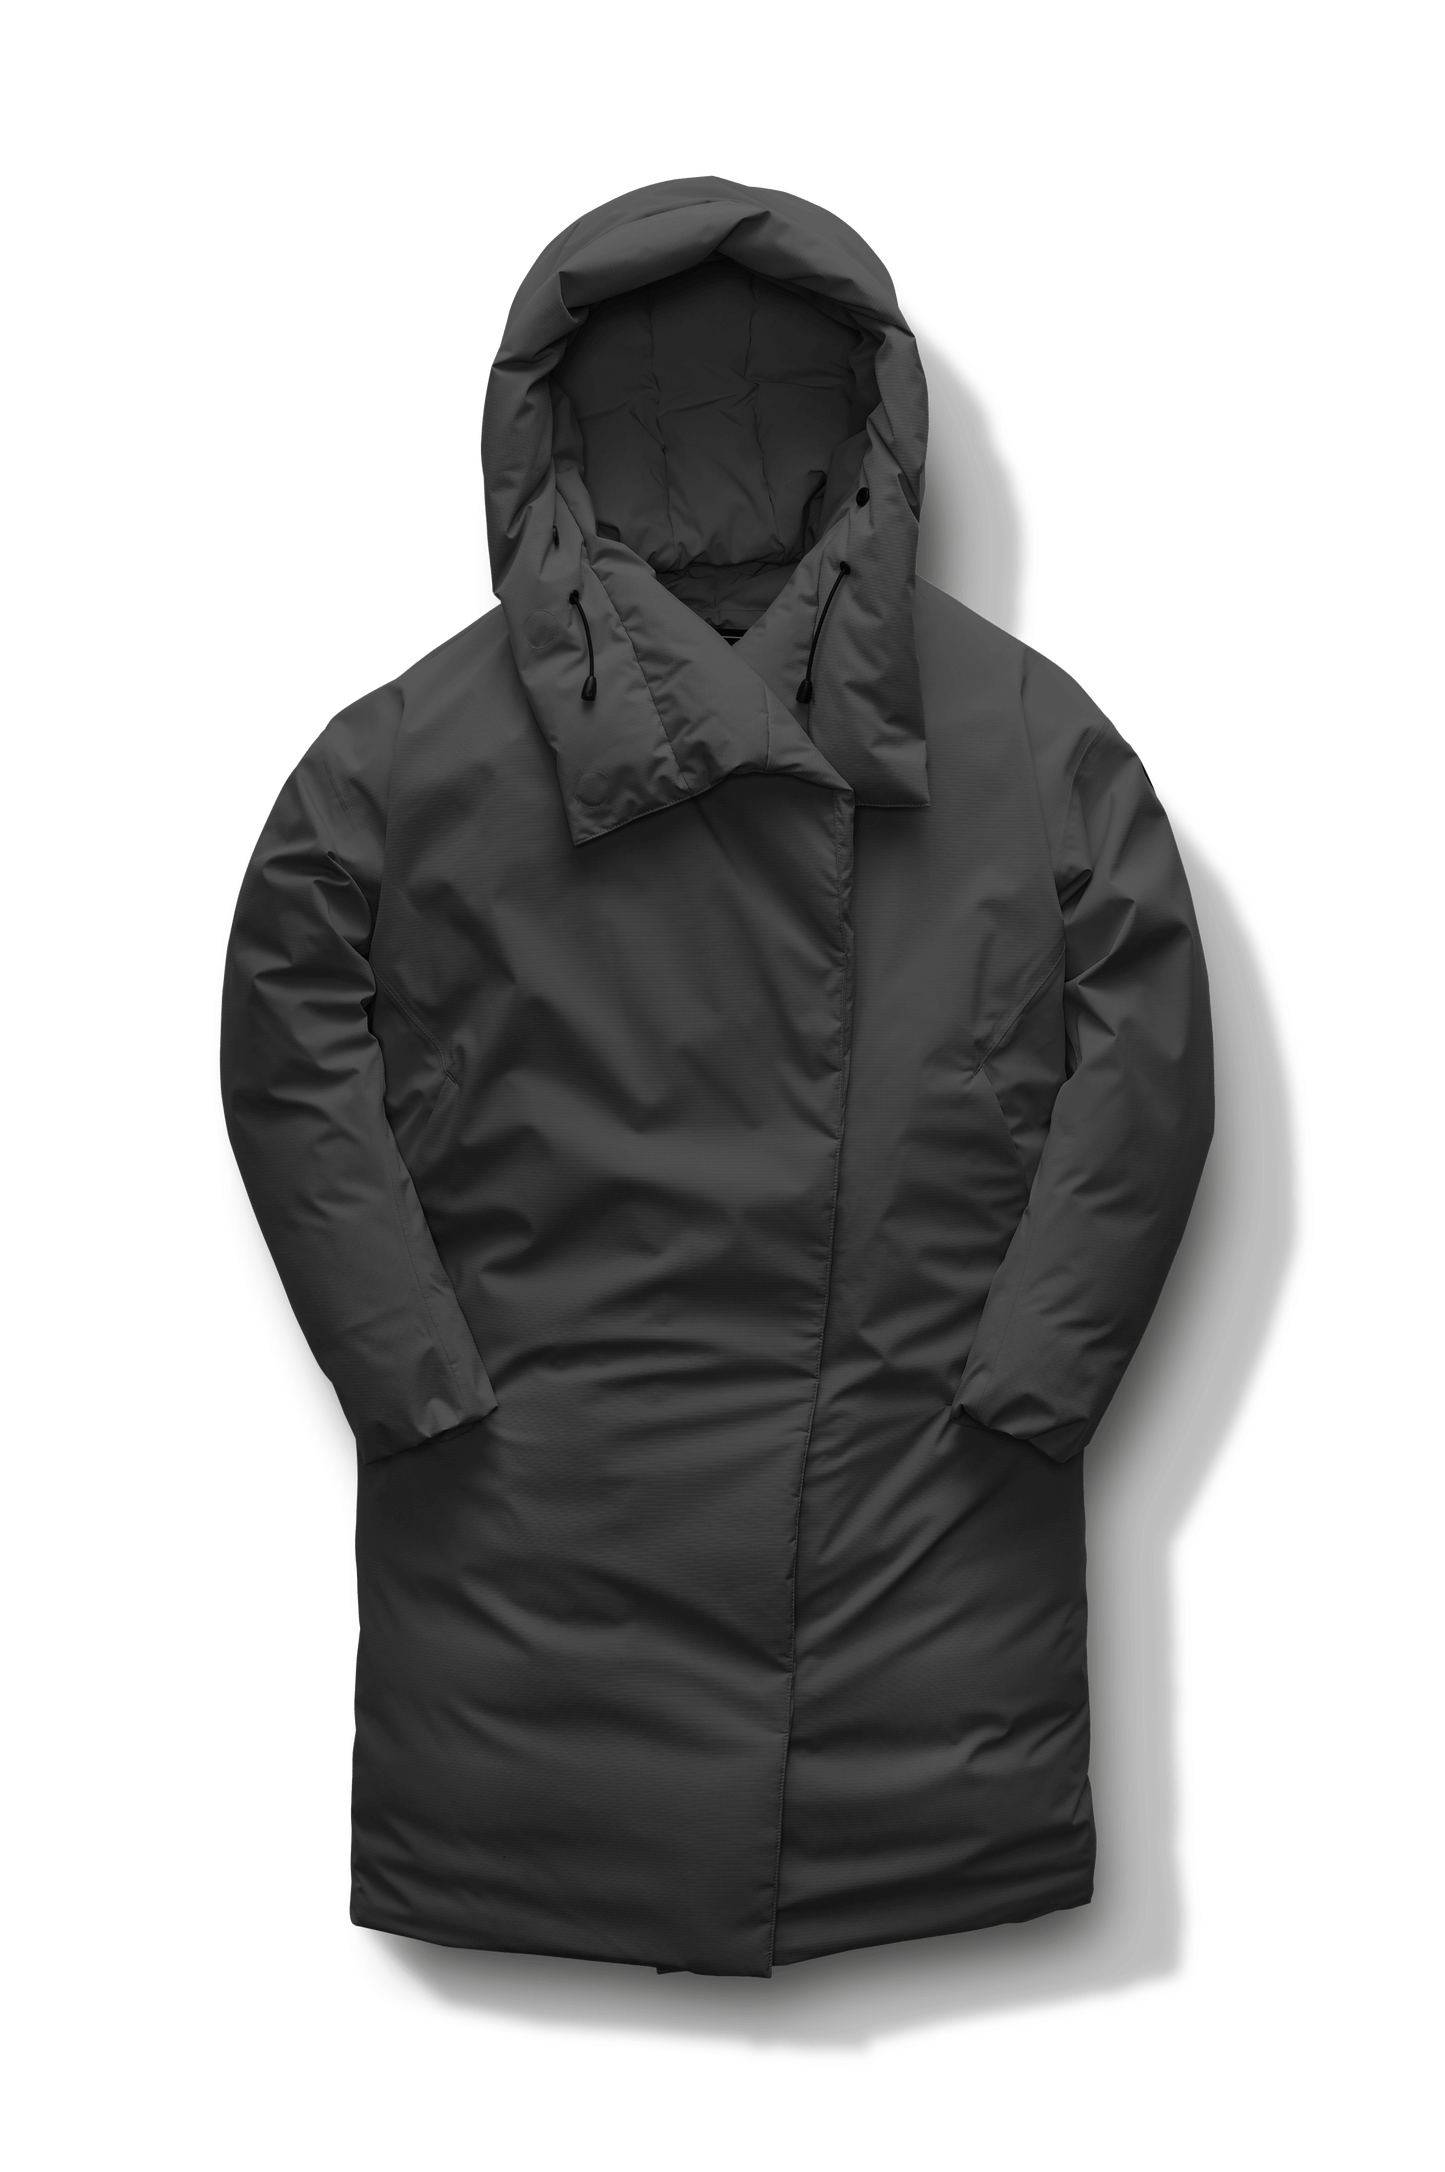 Axis Ladies Oversized Coat in knee length, Canadian duck down insulation, and two-way front zipper, in Black